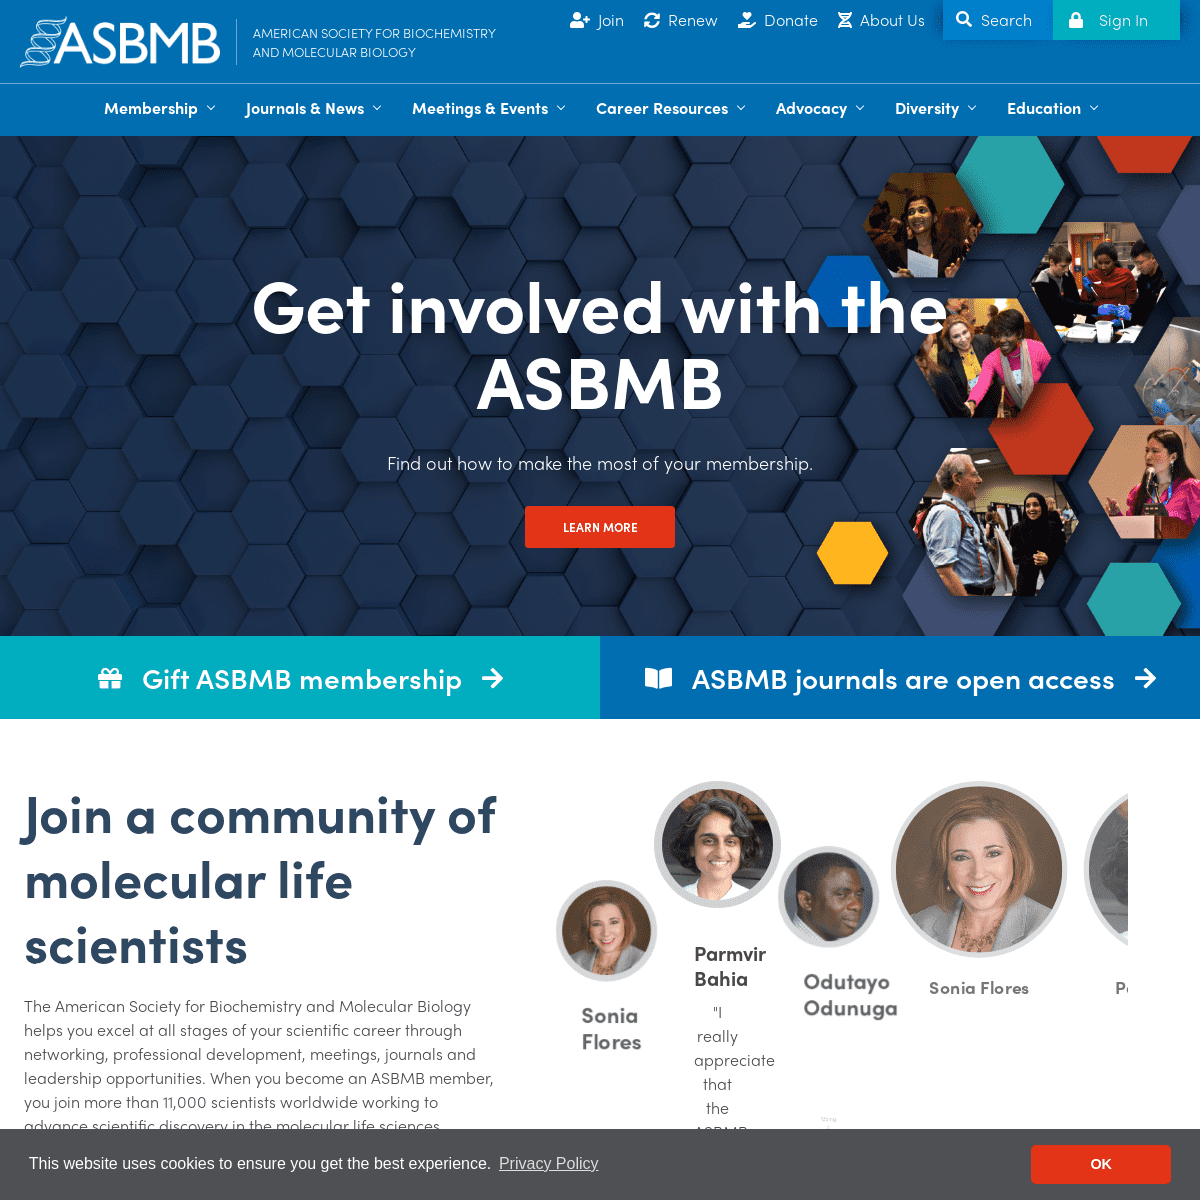 A complete backup of https://asbmb.org